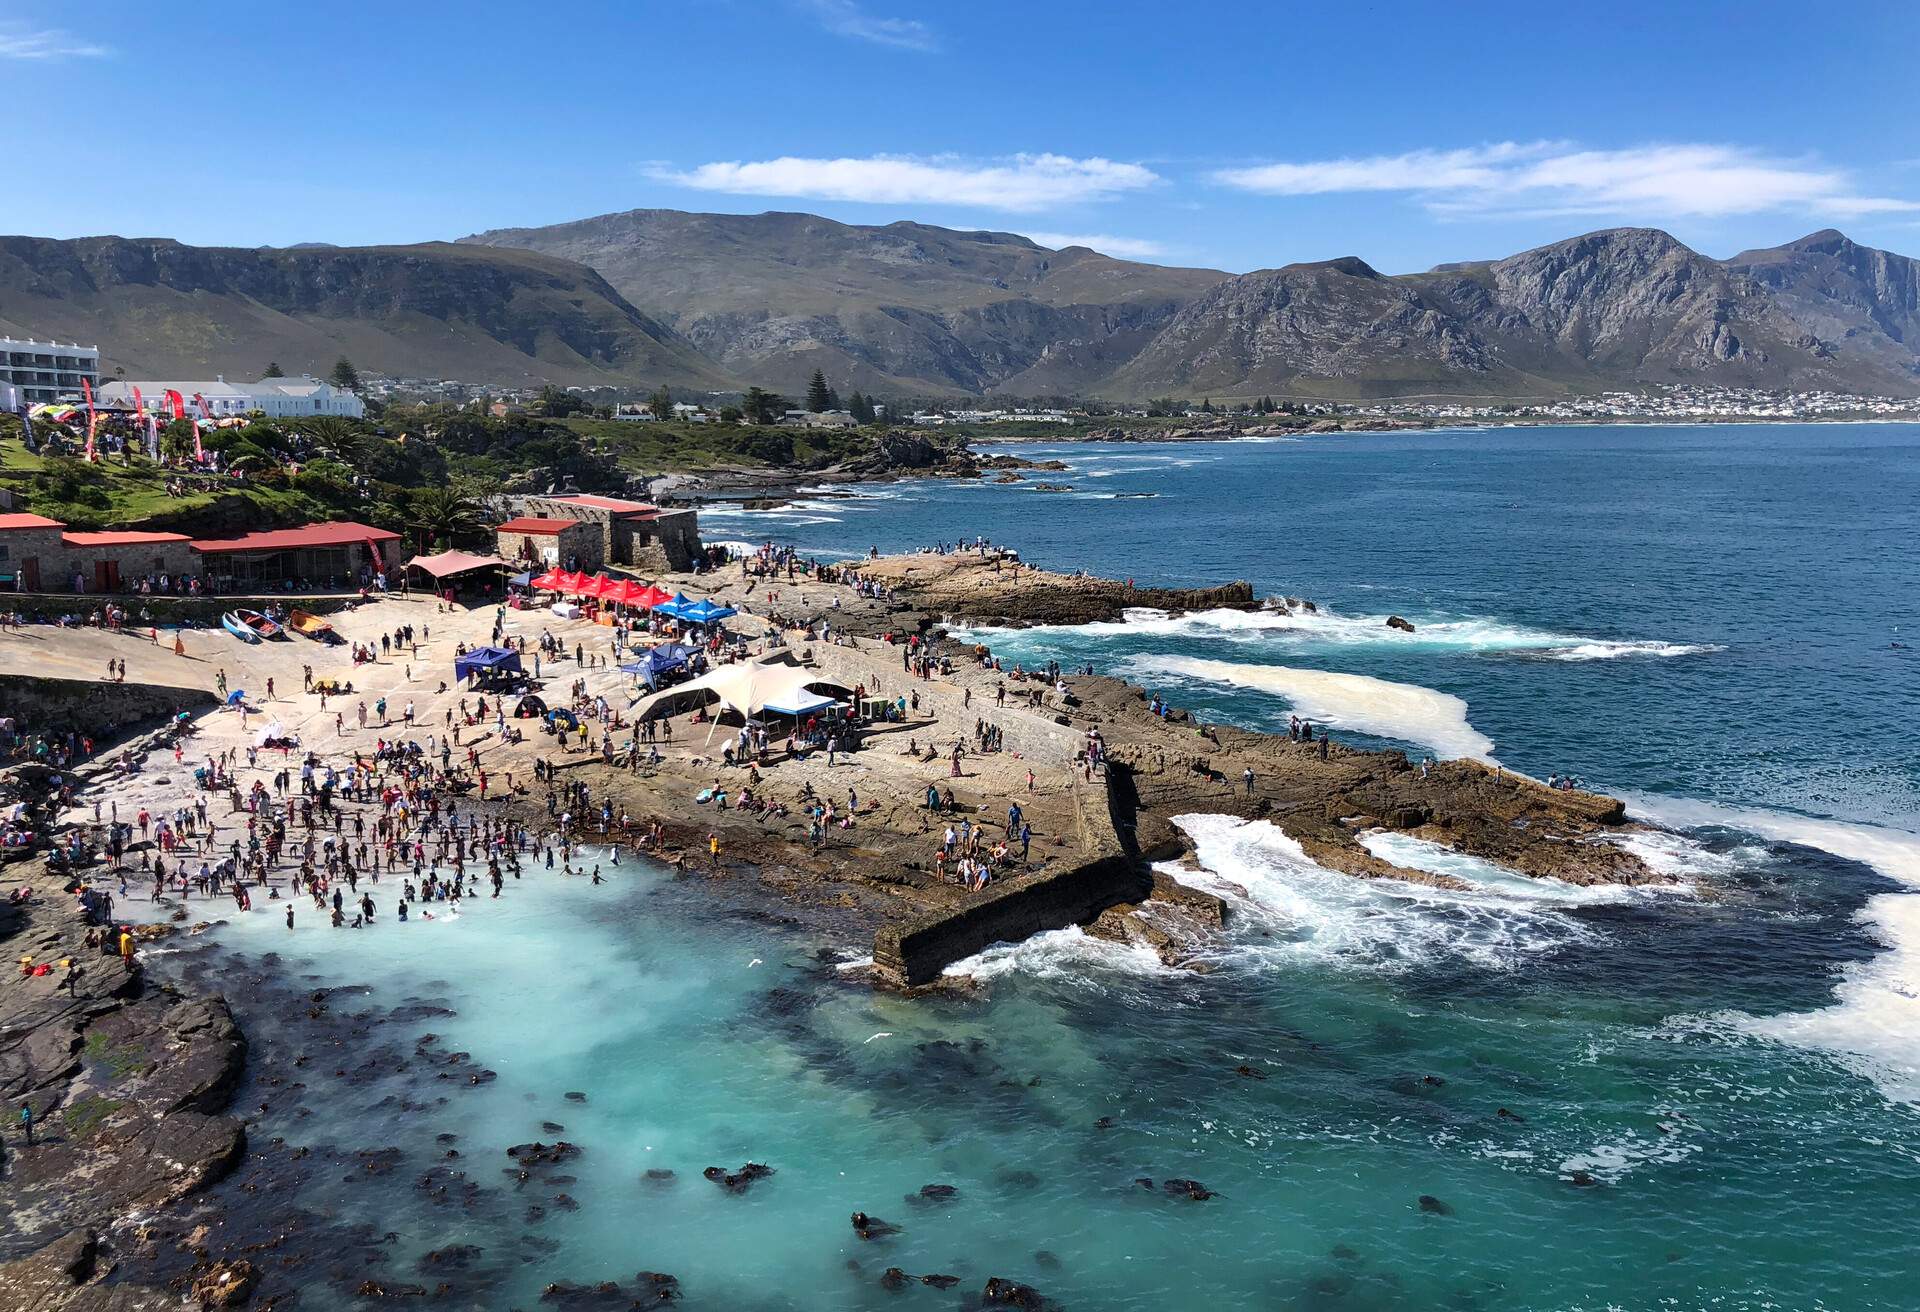 DEST_SOUTH-AFRICA_Hermanus Whale Watching Festival_GettyImages-1088845228